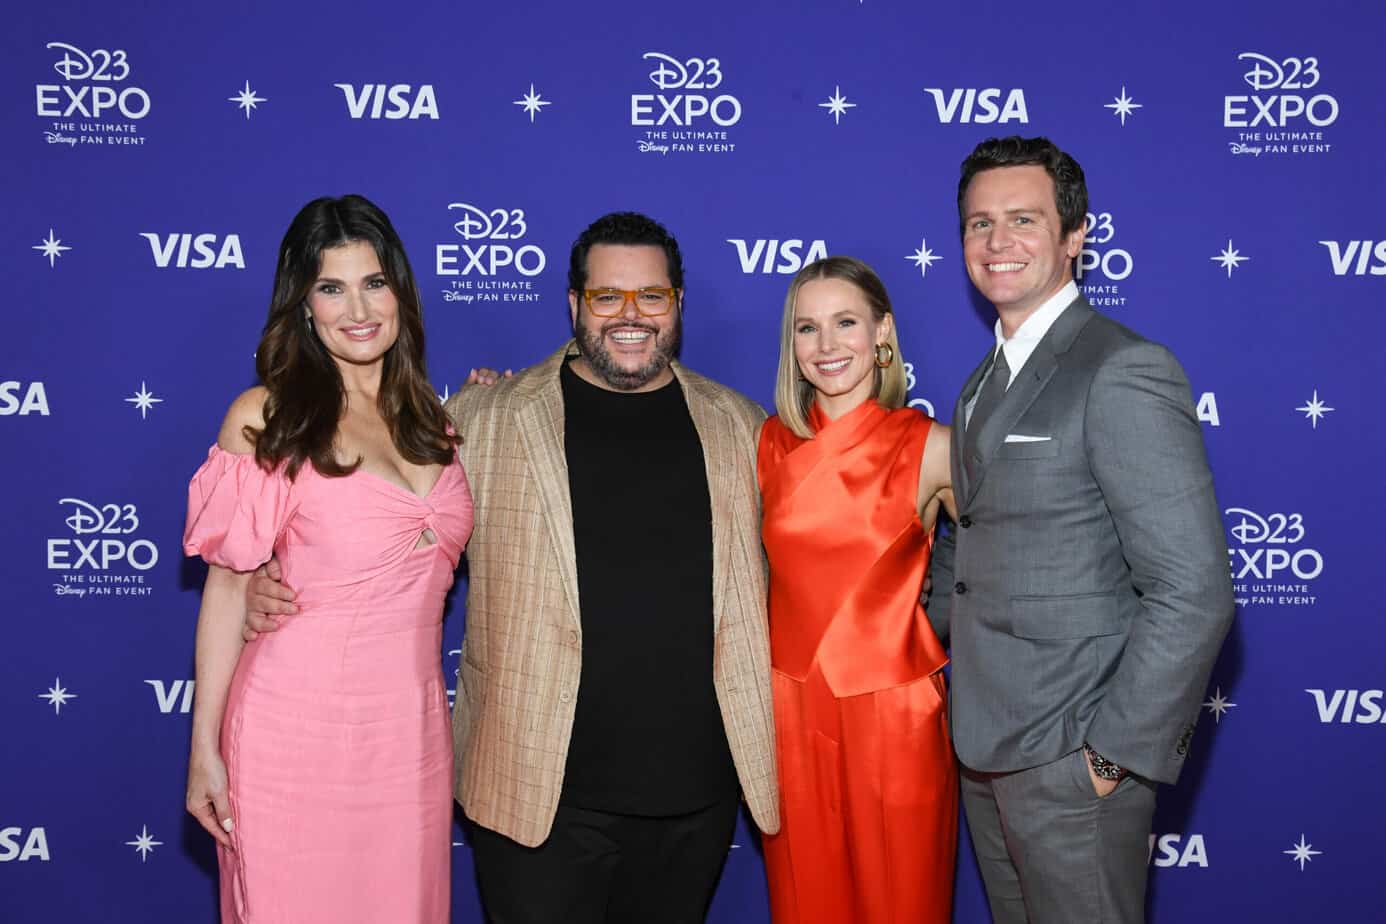 Disney Legends Idina Menzel, Josh Gad, Kristen Bell, and Jonathan Groff standing in front of a D23 Expo sign.